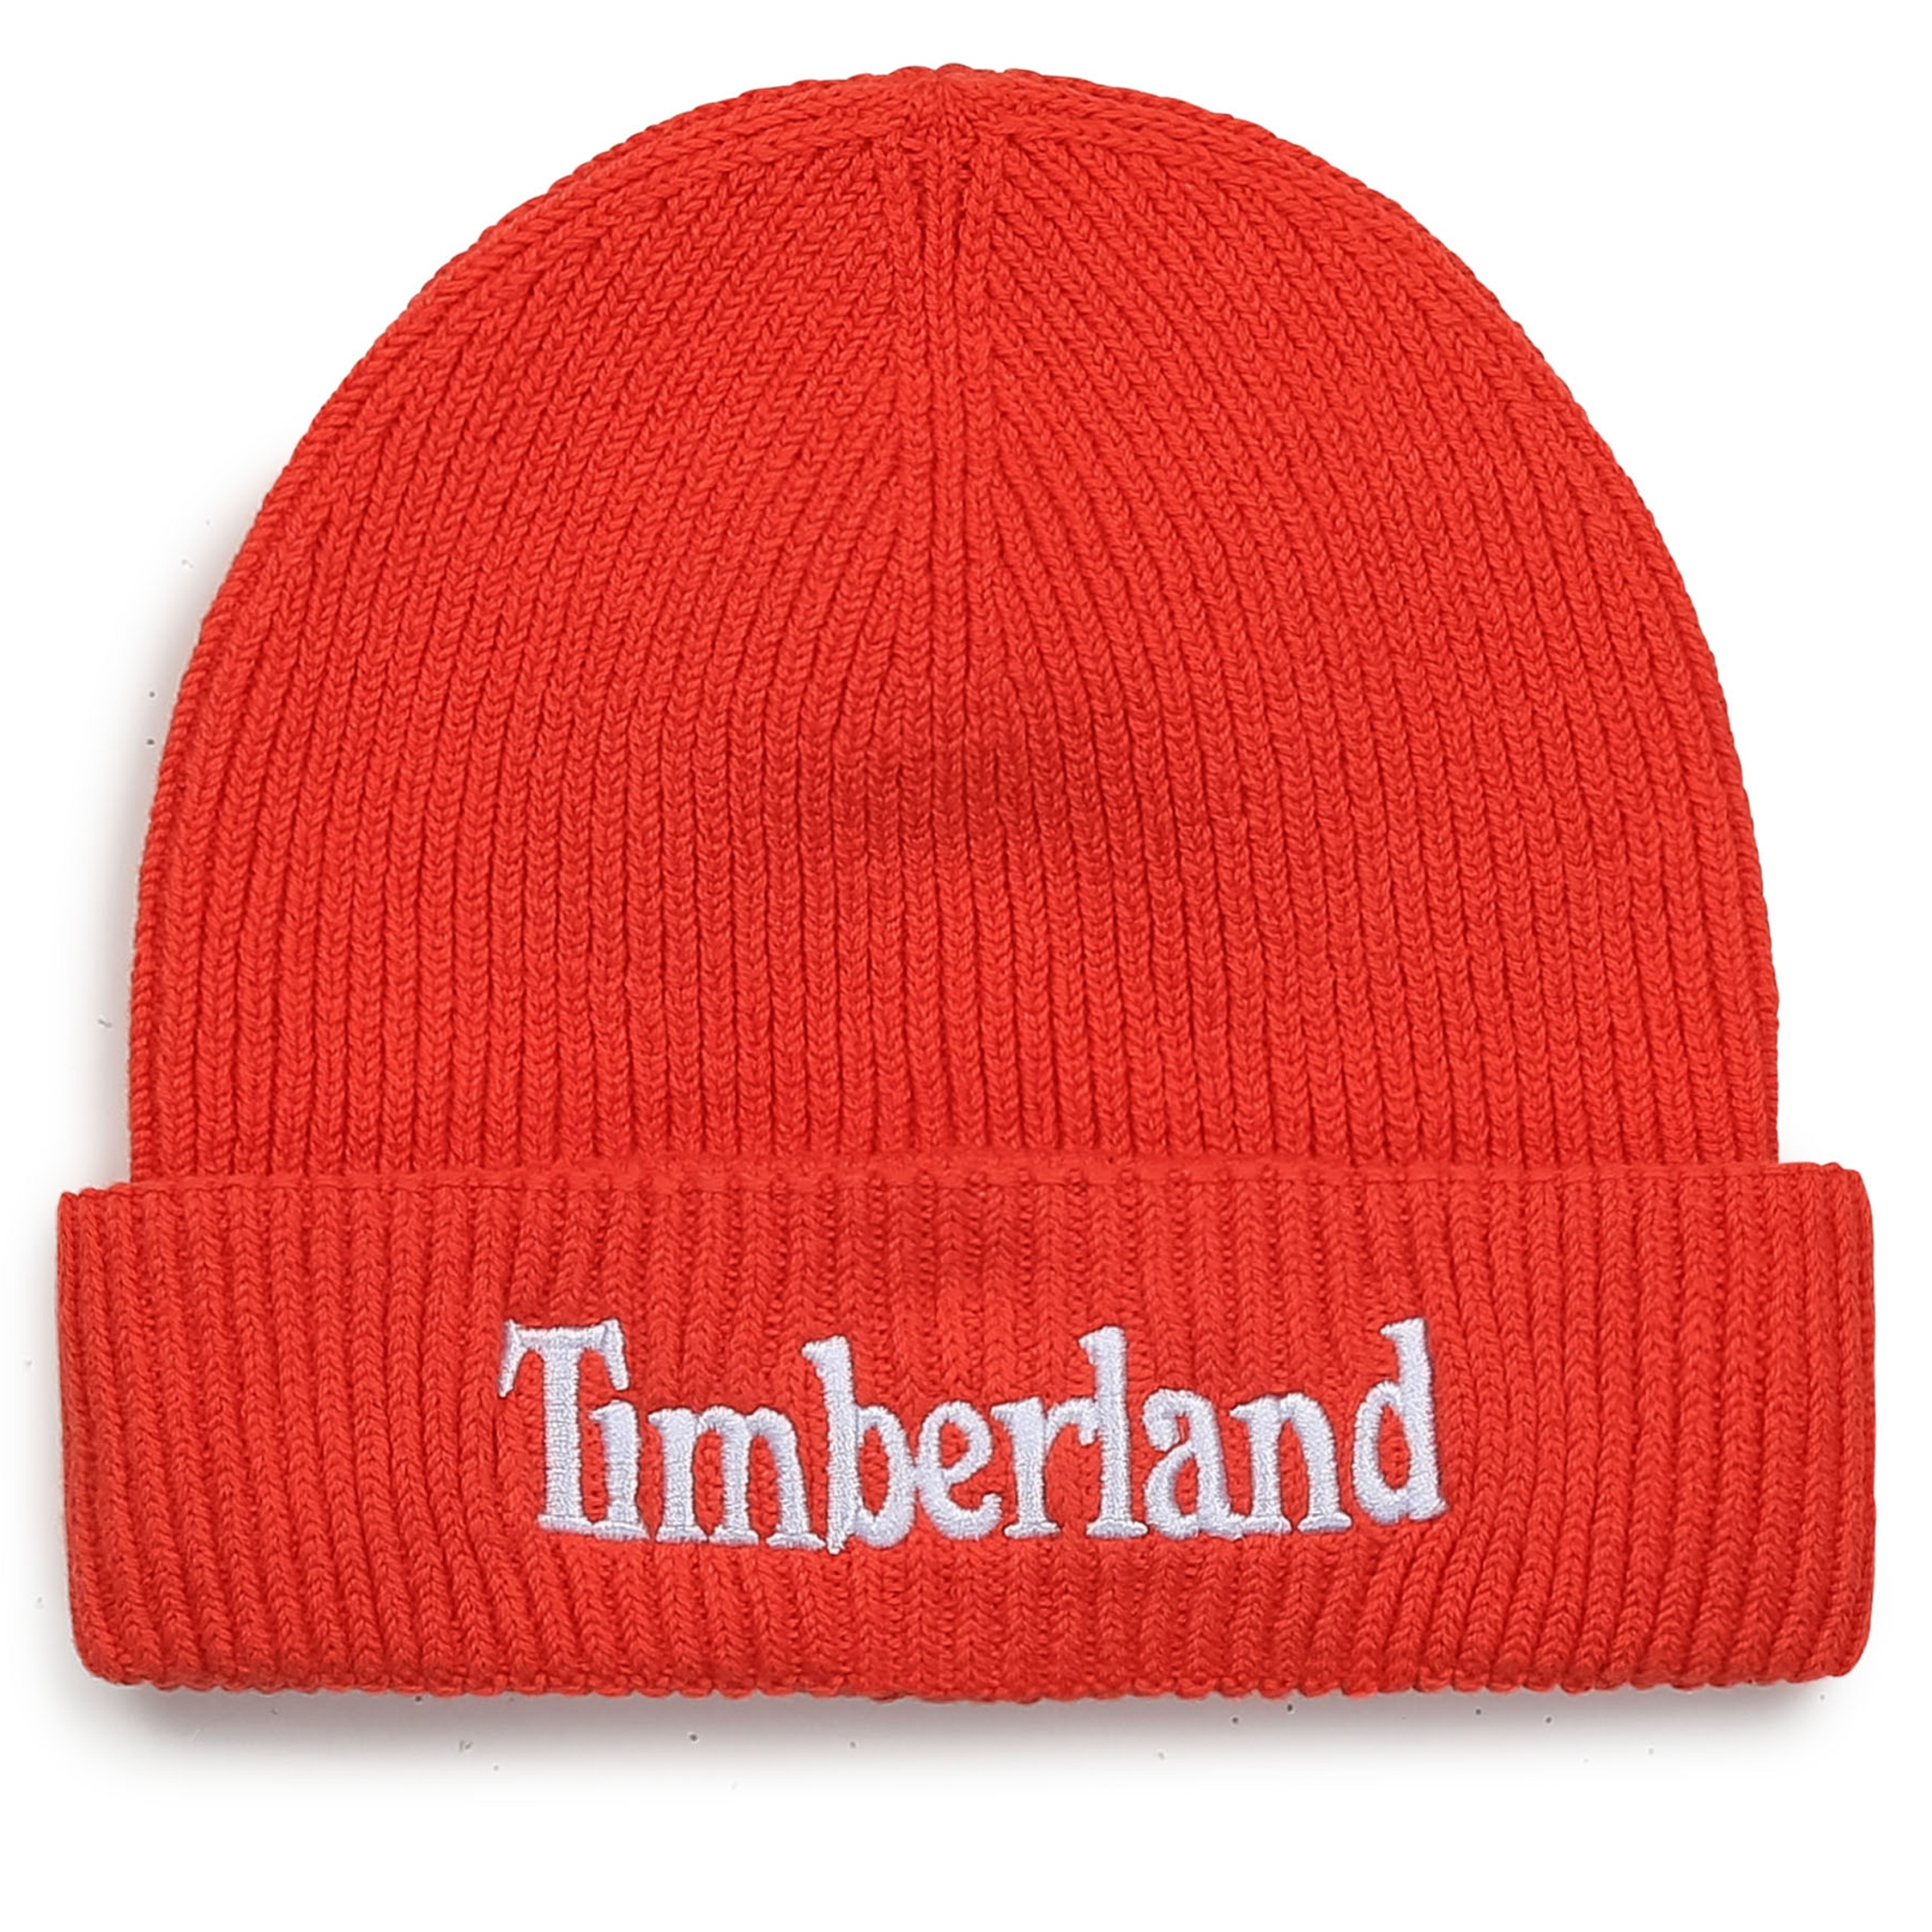 https://www.leadermode.com/210083/timberland-t01305-40a-chile-red.jpg